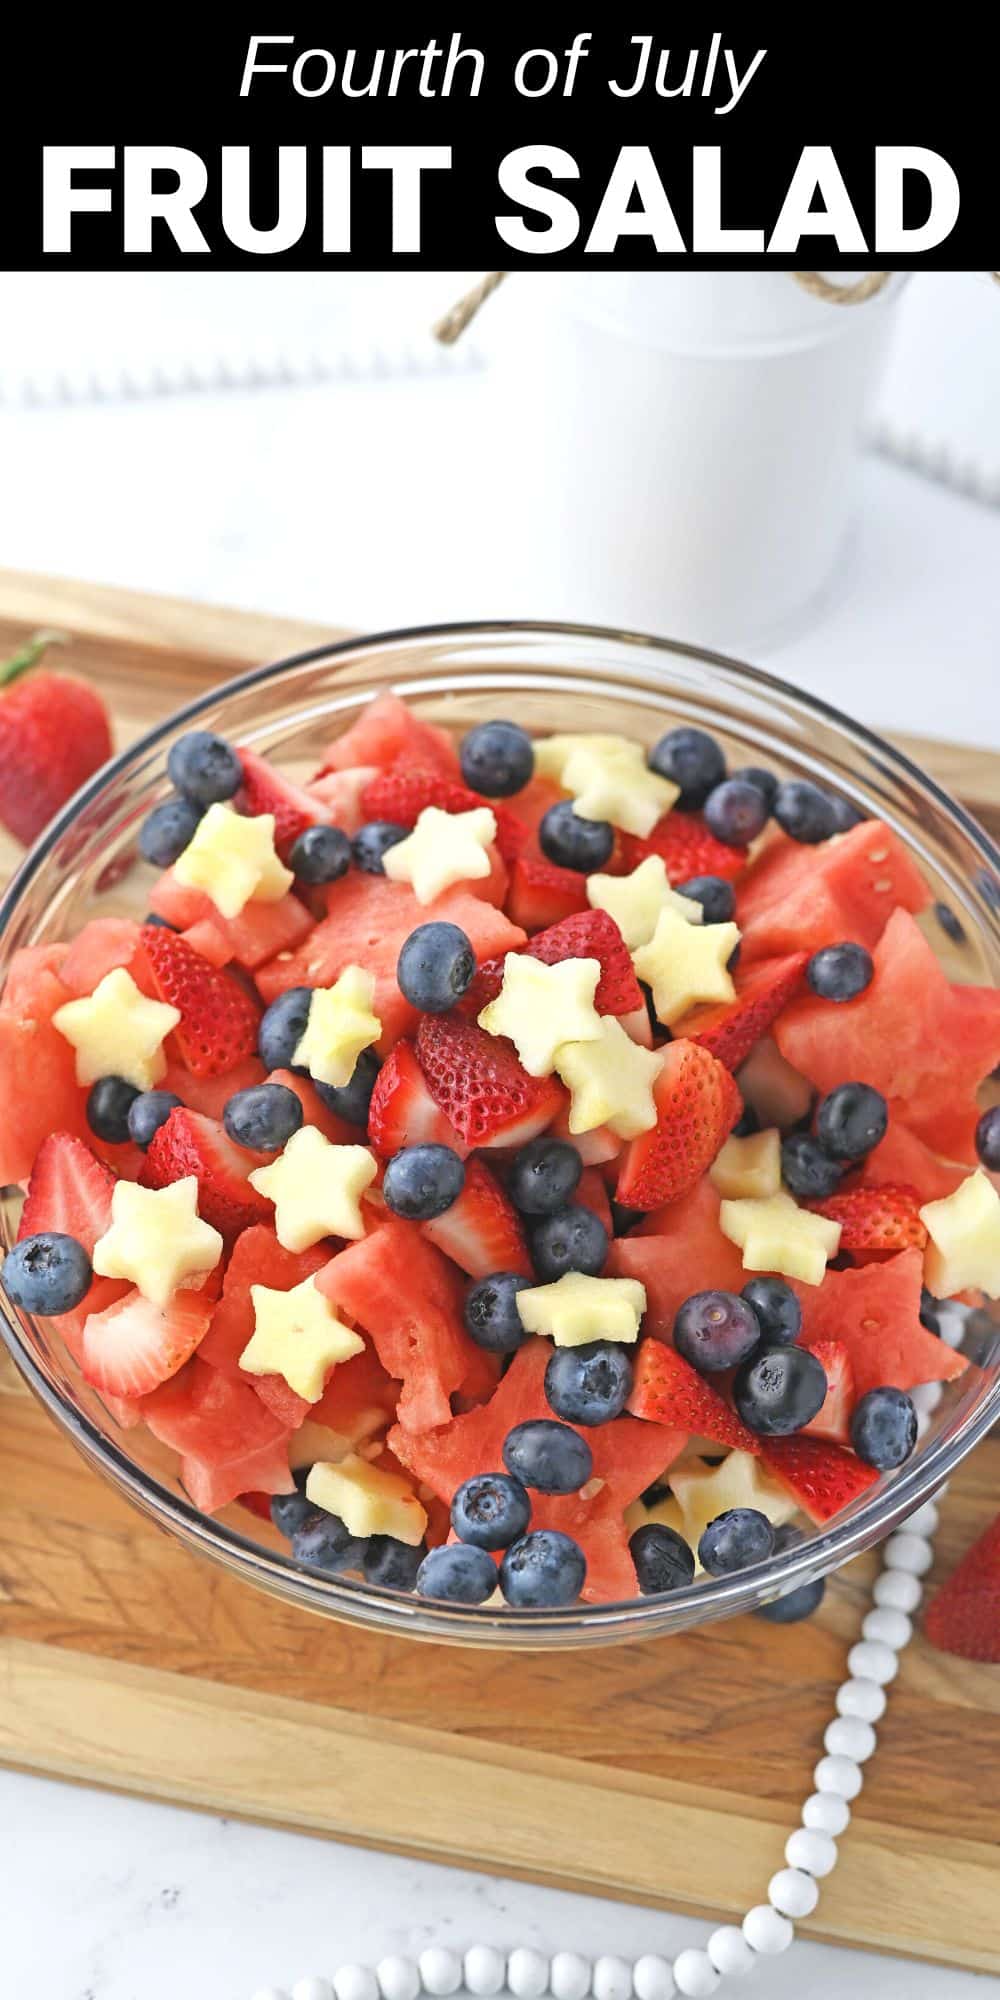 This easy and delicious Fourth of July Fruit Salad brings together the best of summer's fruits in the most festive way. With a combination of juicy red, white, and blue fruits, this beautiful salad is the perfect way to add a pop of color to all your patriotic holidays.